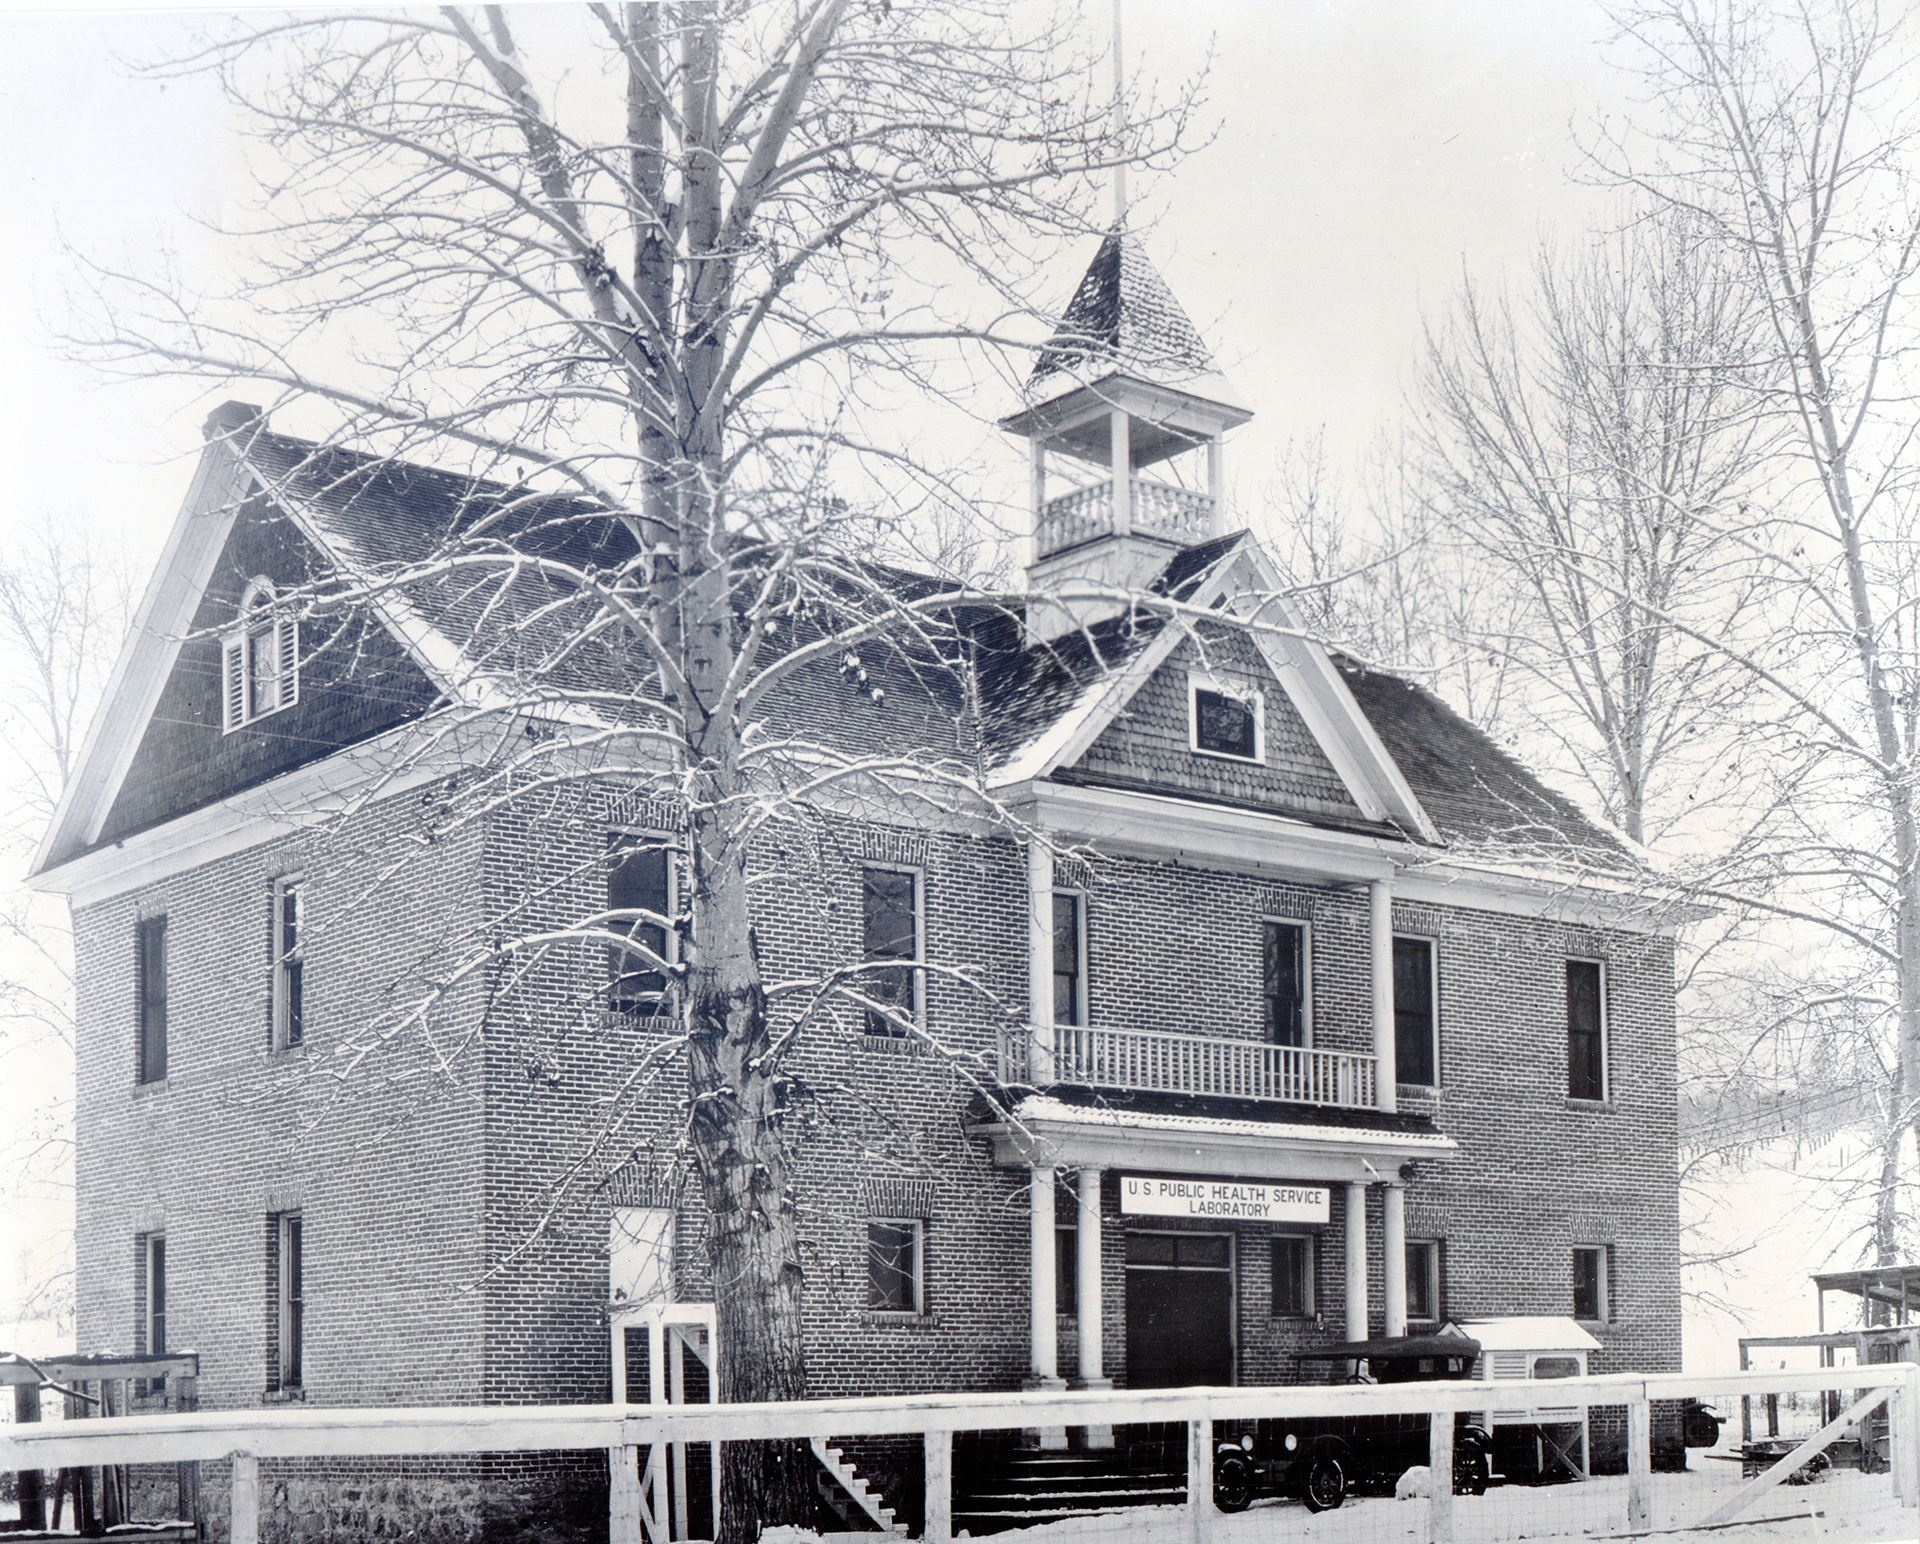 The Canyon Creek Schoolhouse Laboratory is a two story brick building with attic. A sign hangs from the door saying it's the U.S. Public Health Service Laboratory.